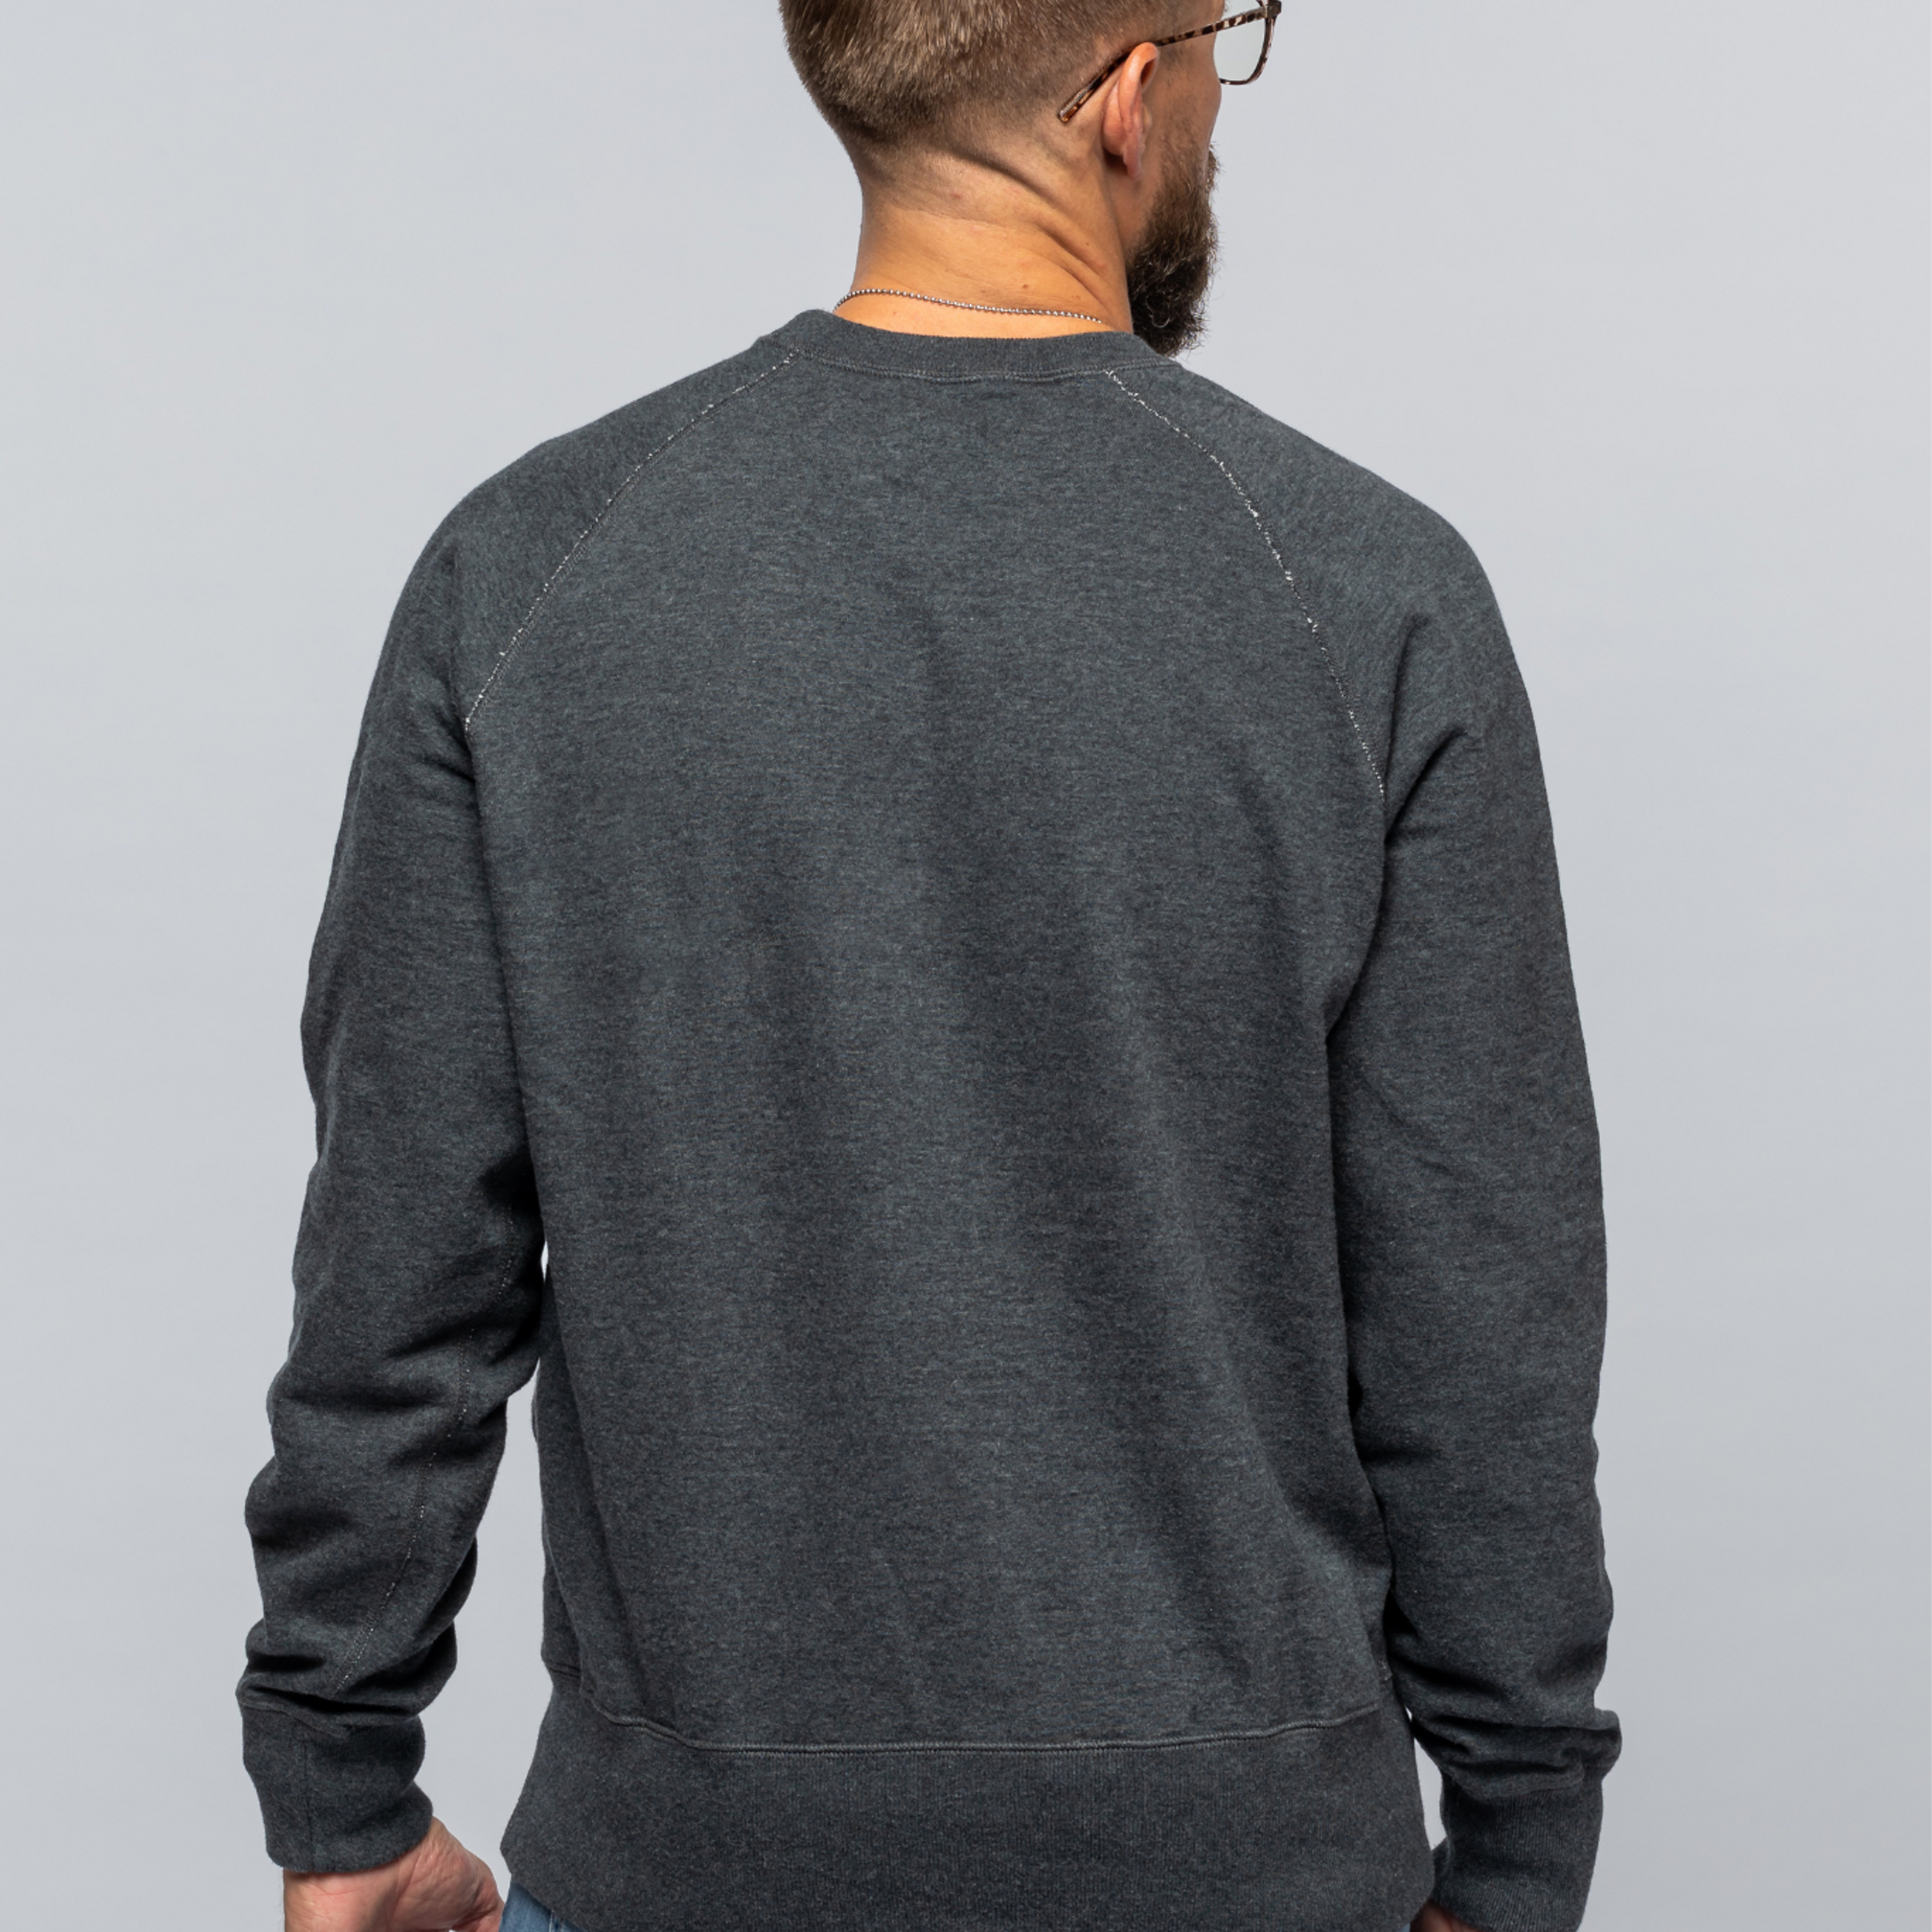 The Terry Crew - Athletic Charcoal Heather